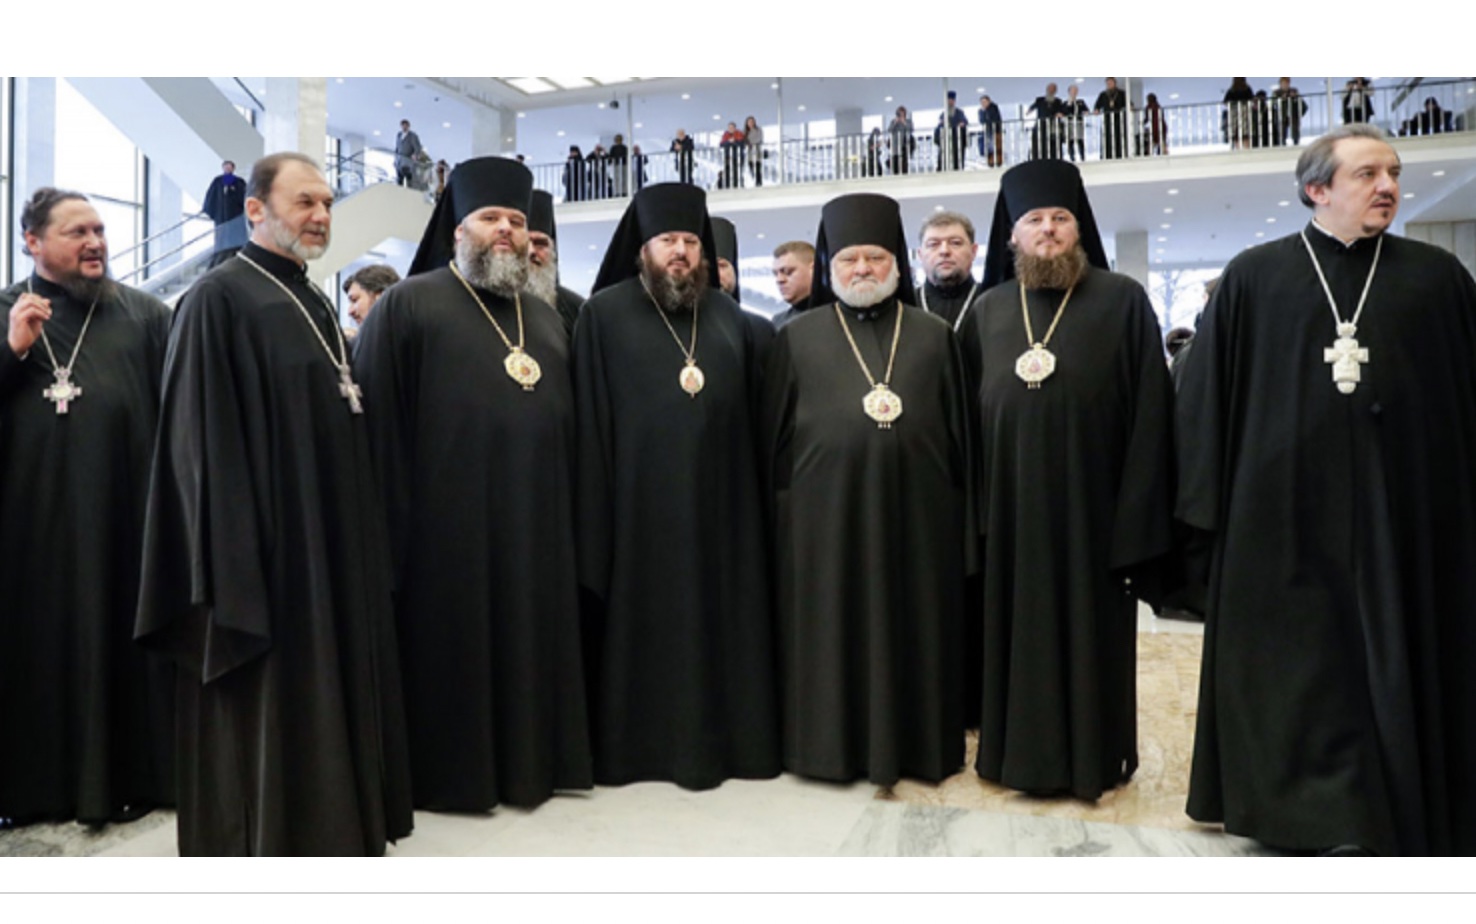 Appeal of the Clergy of the Russian Orthodox Church Calling for Reconciliation and an End to the War